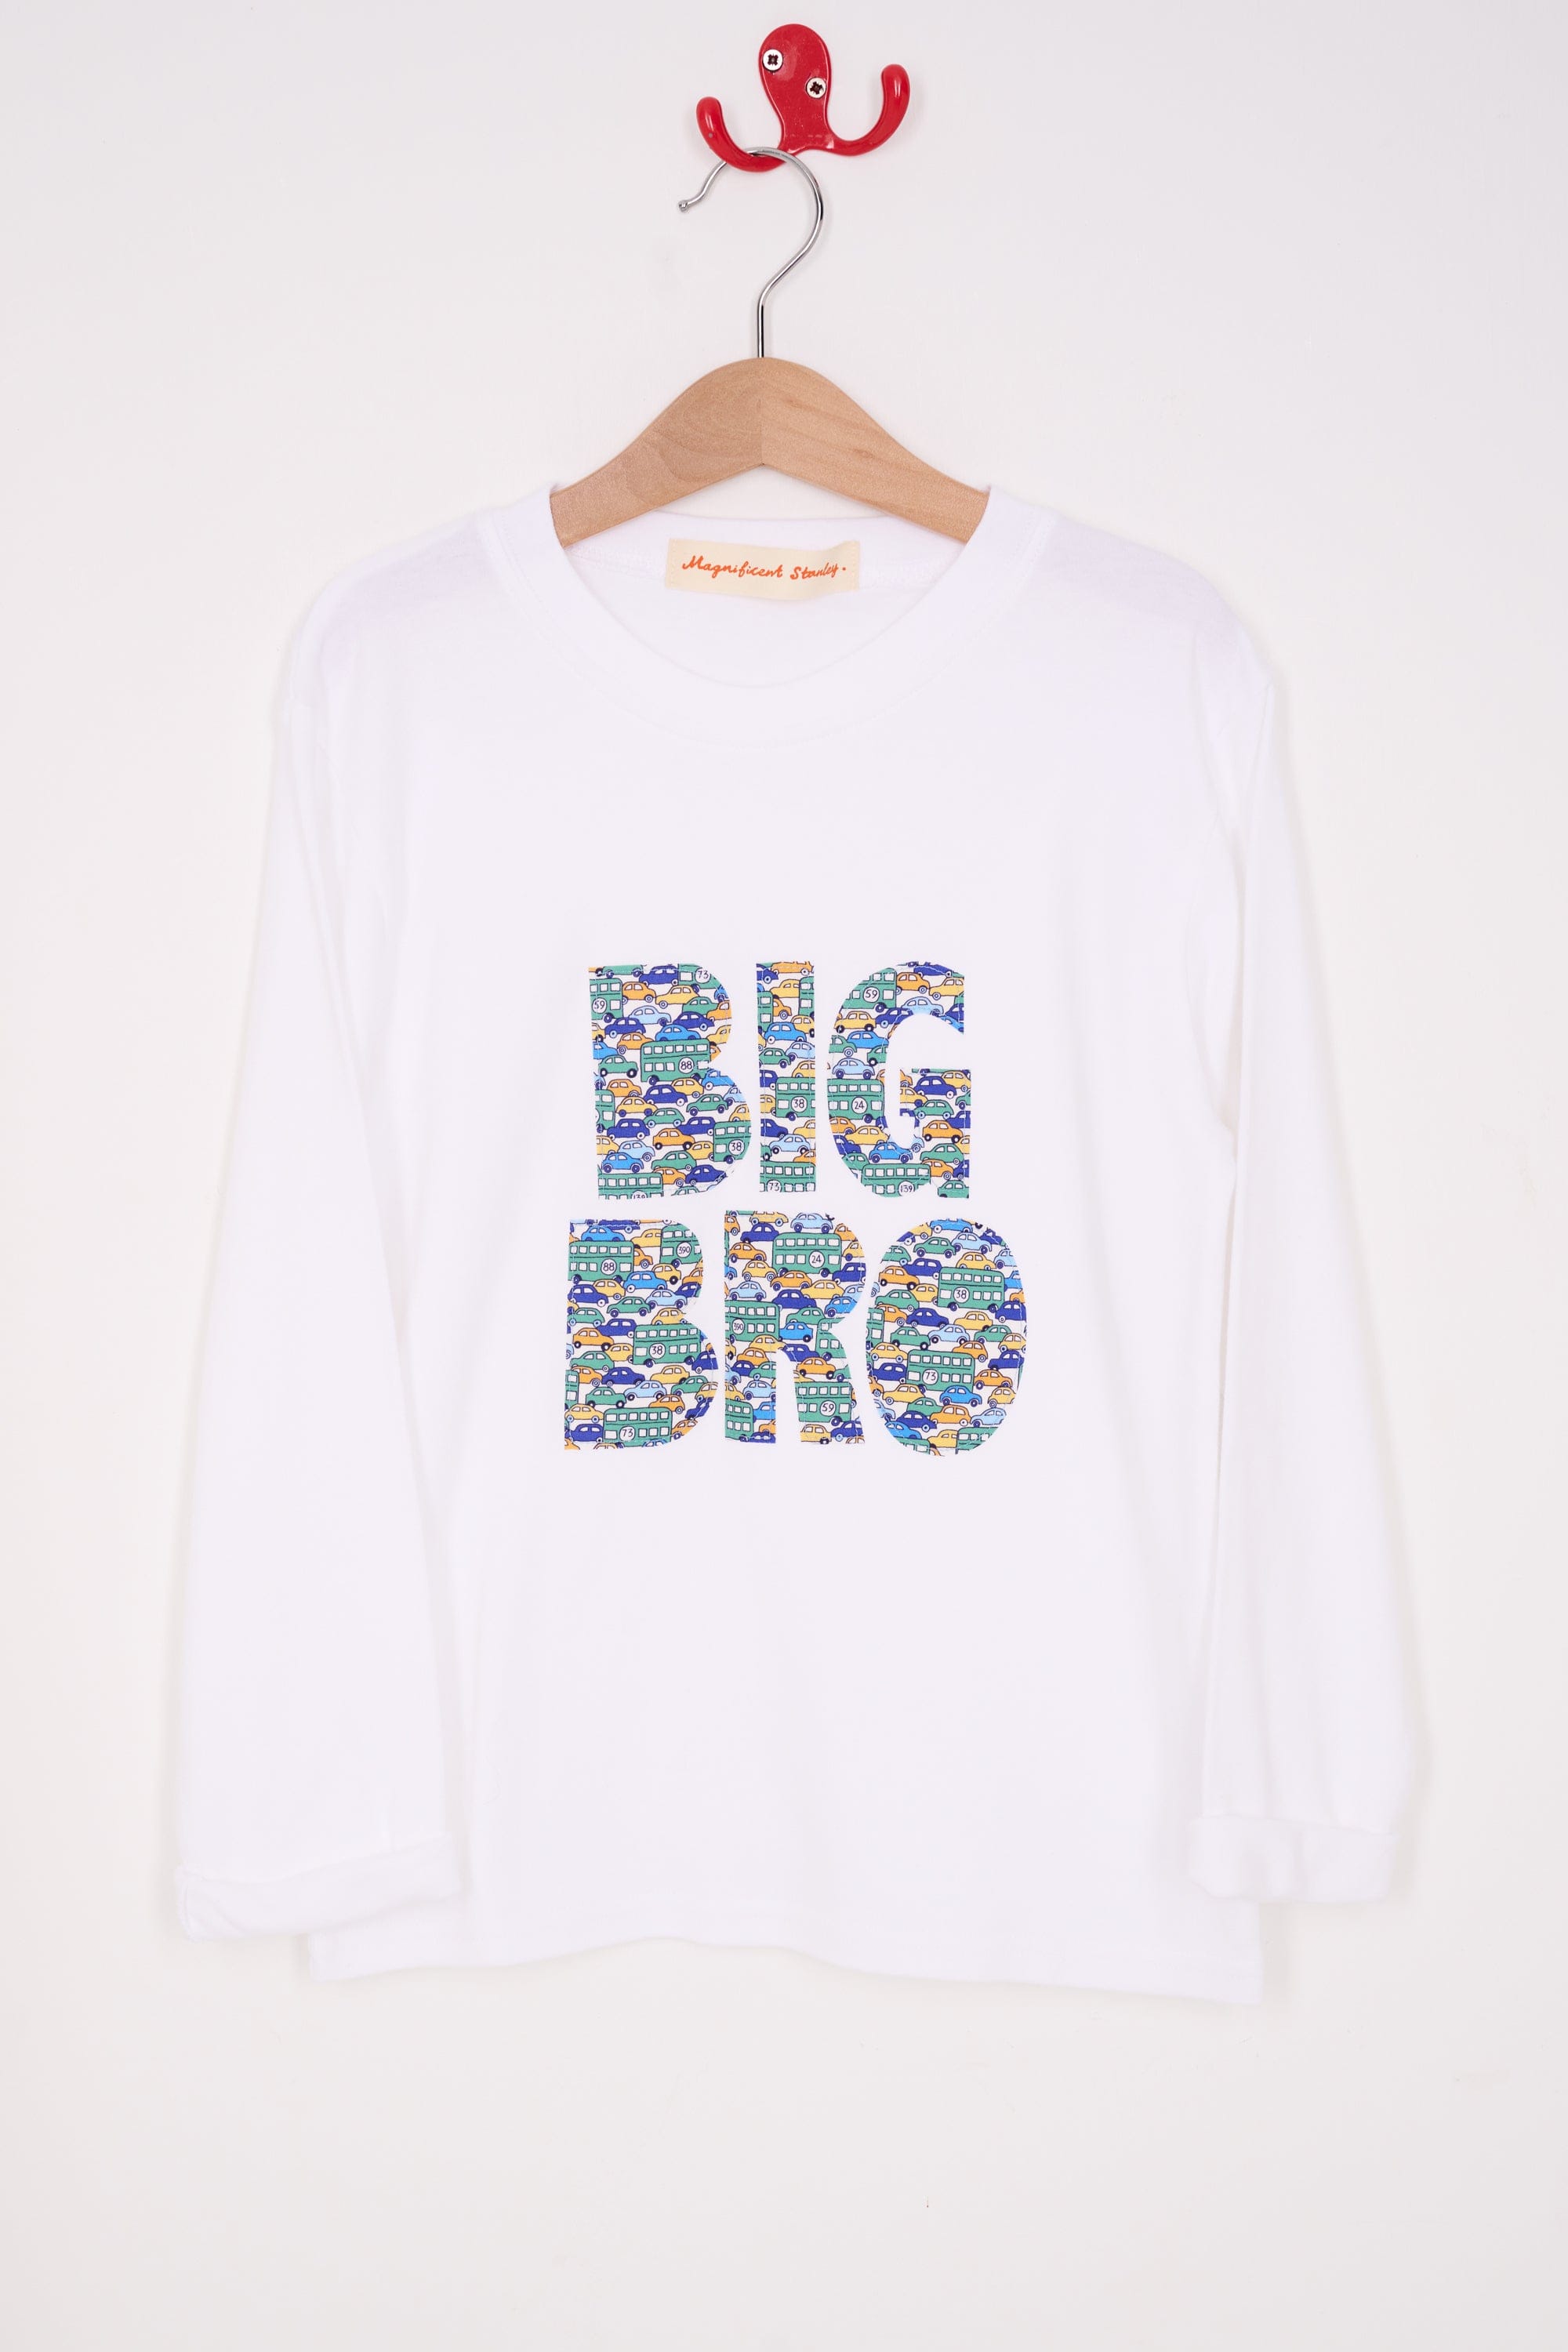 Magnificent Stanley Tee BIG BRO T-Shirt in Choice of Liberty Print